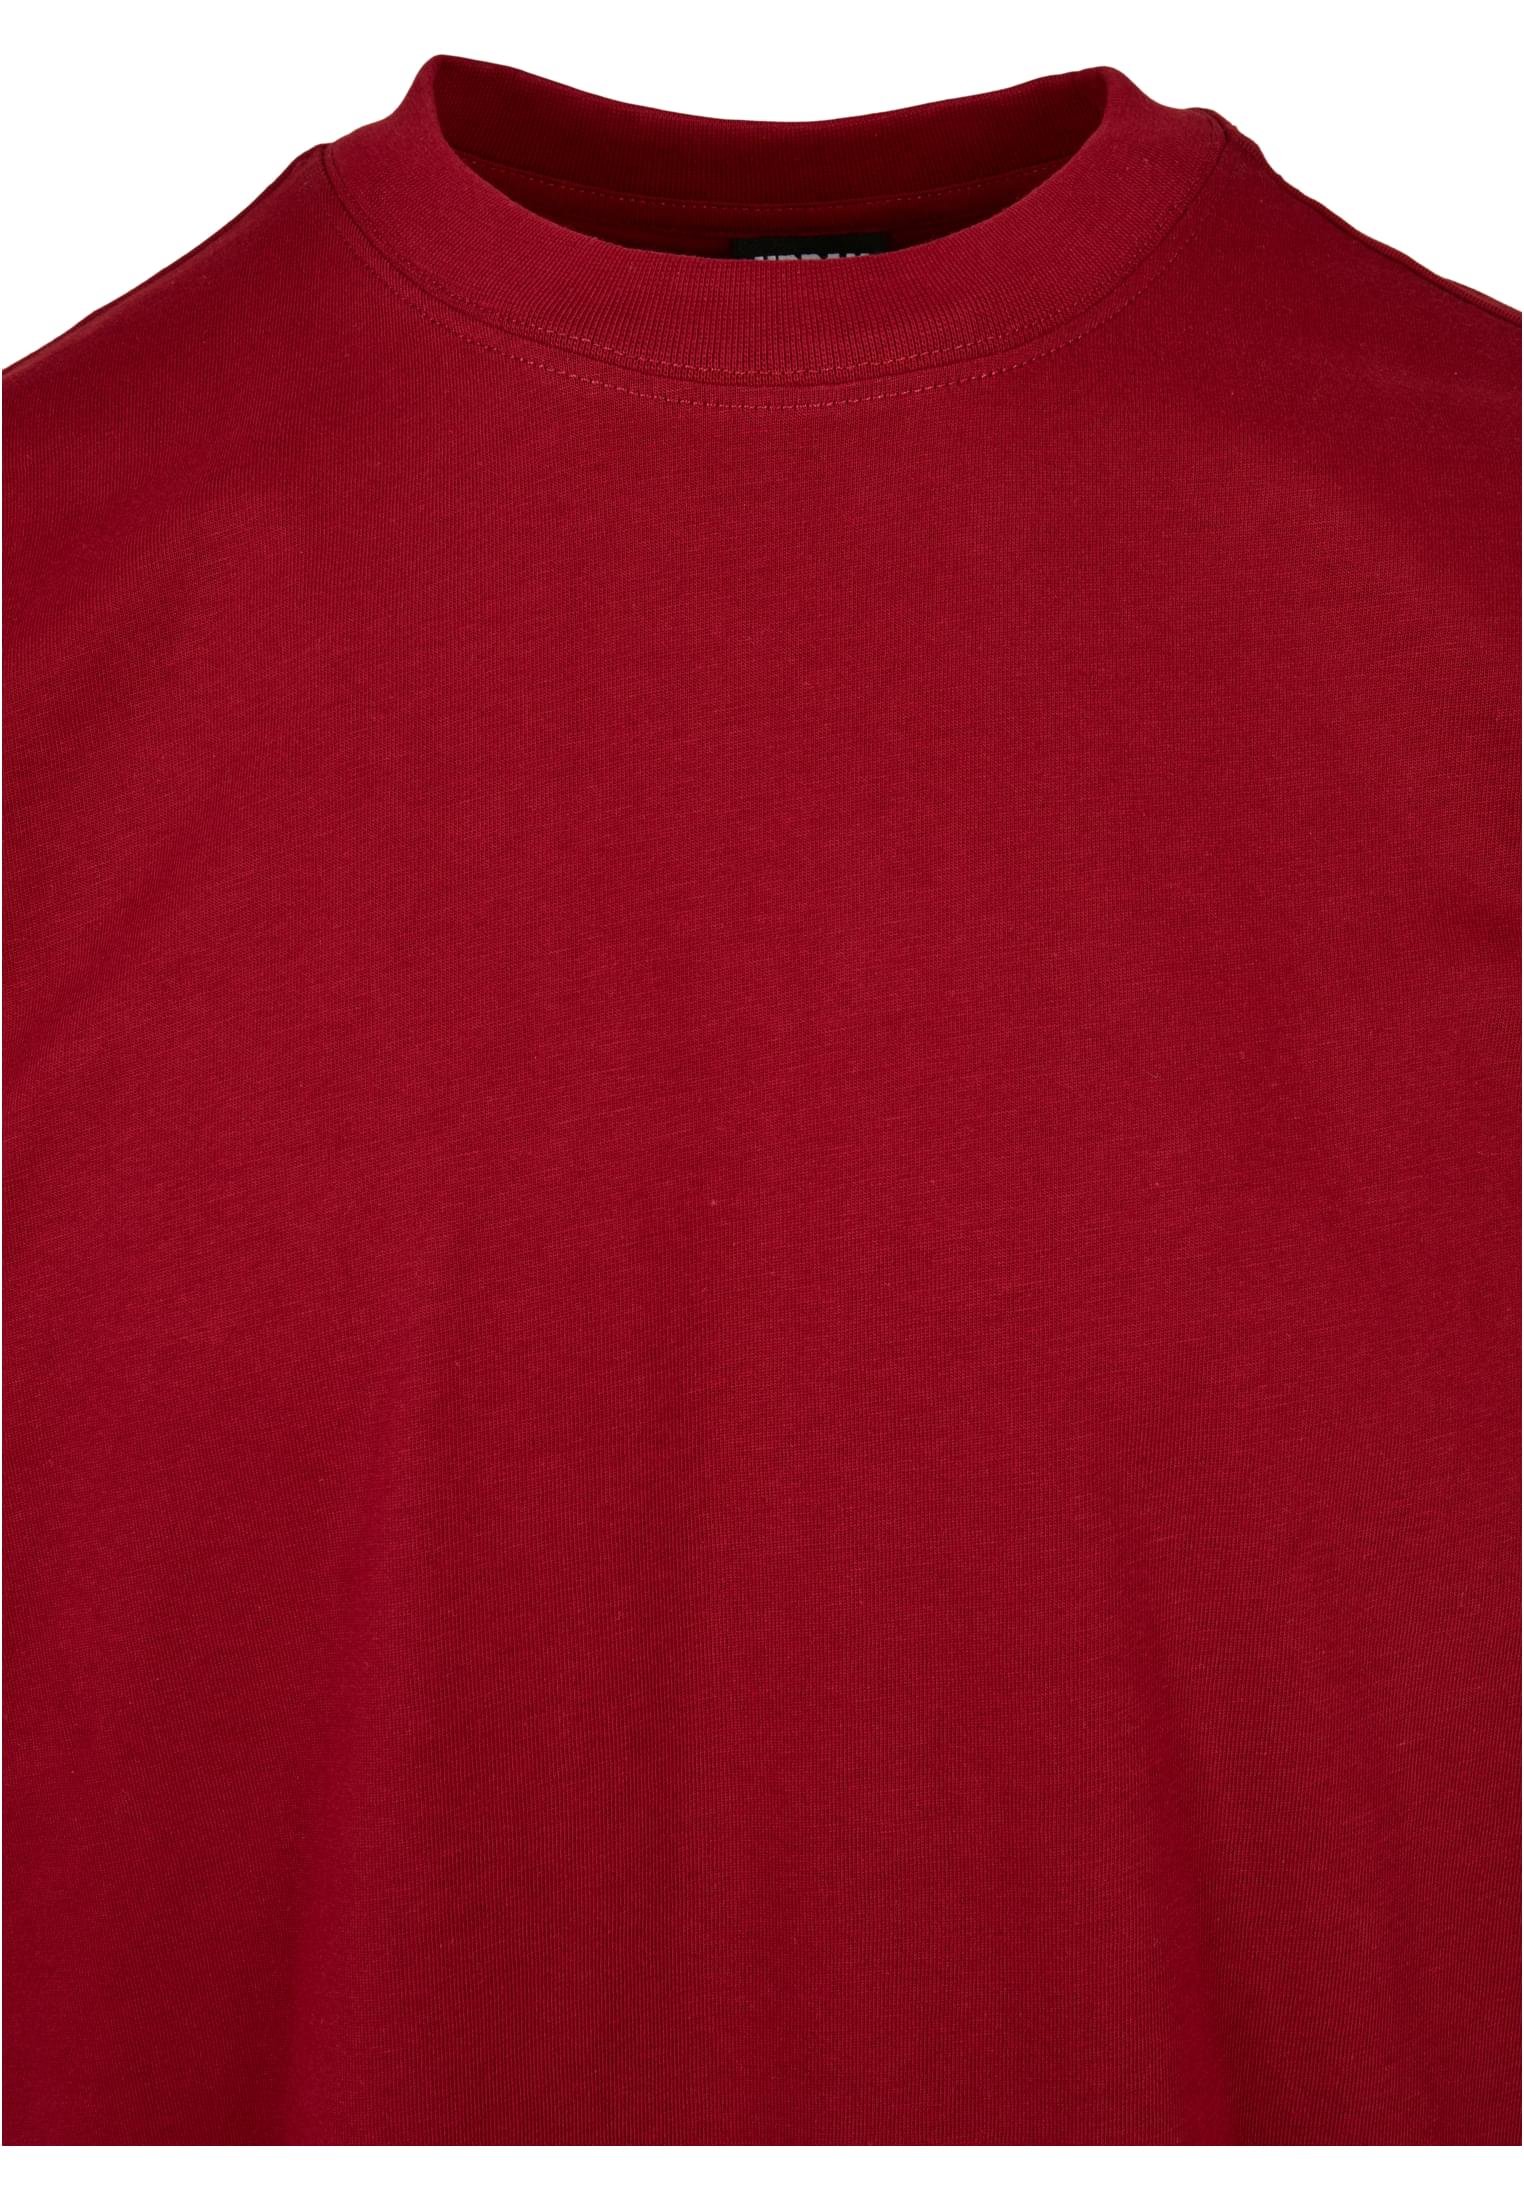 Plus Size Tall Tee in Farbe brickred